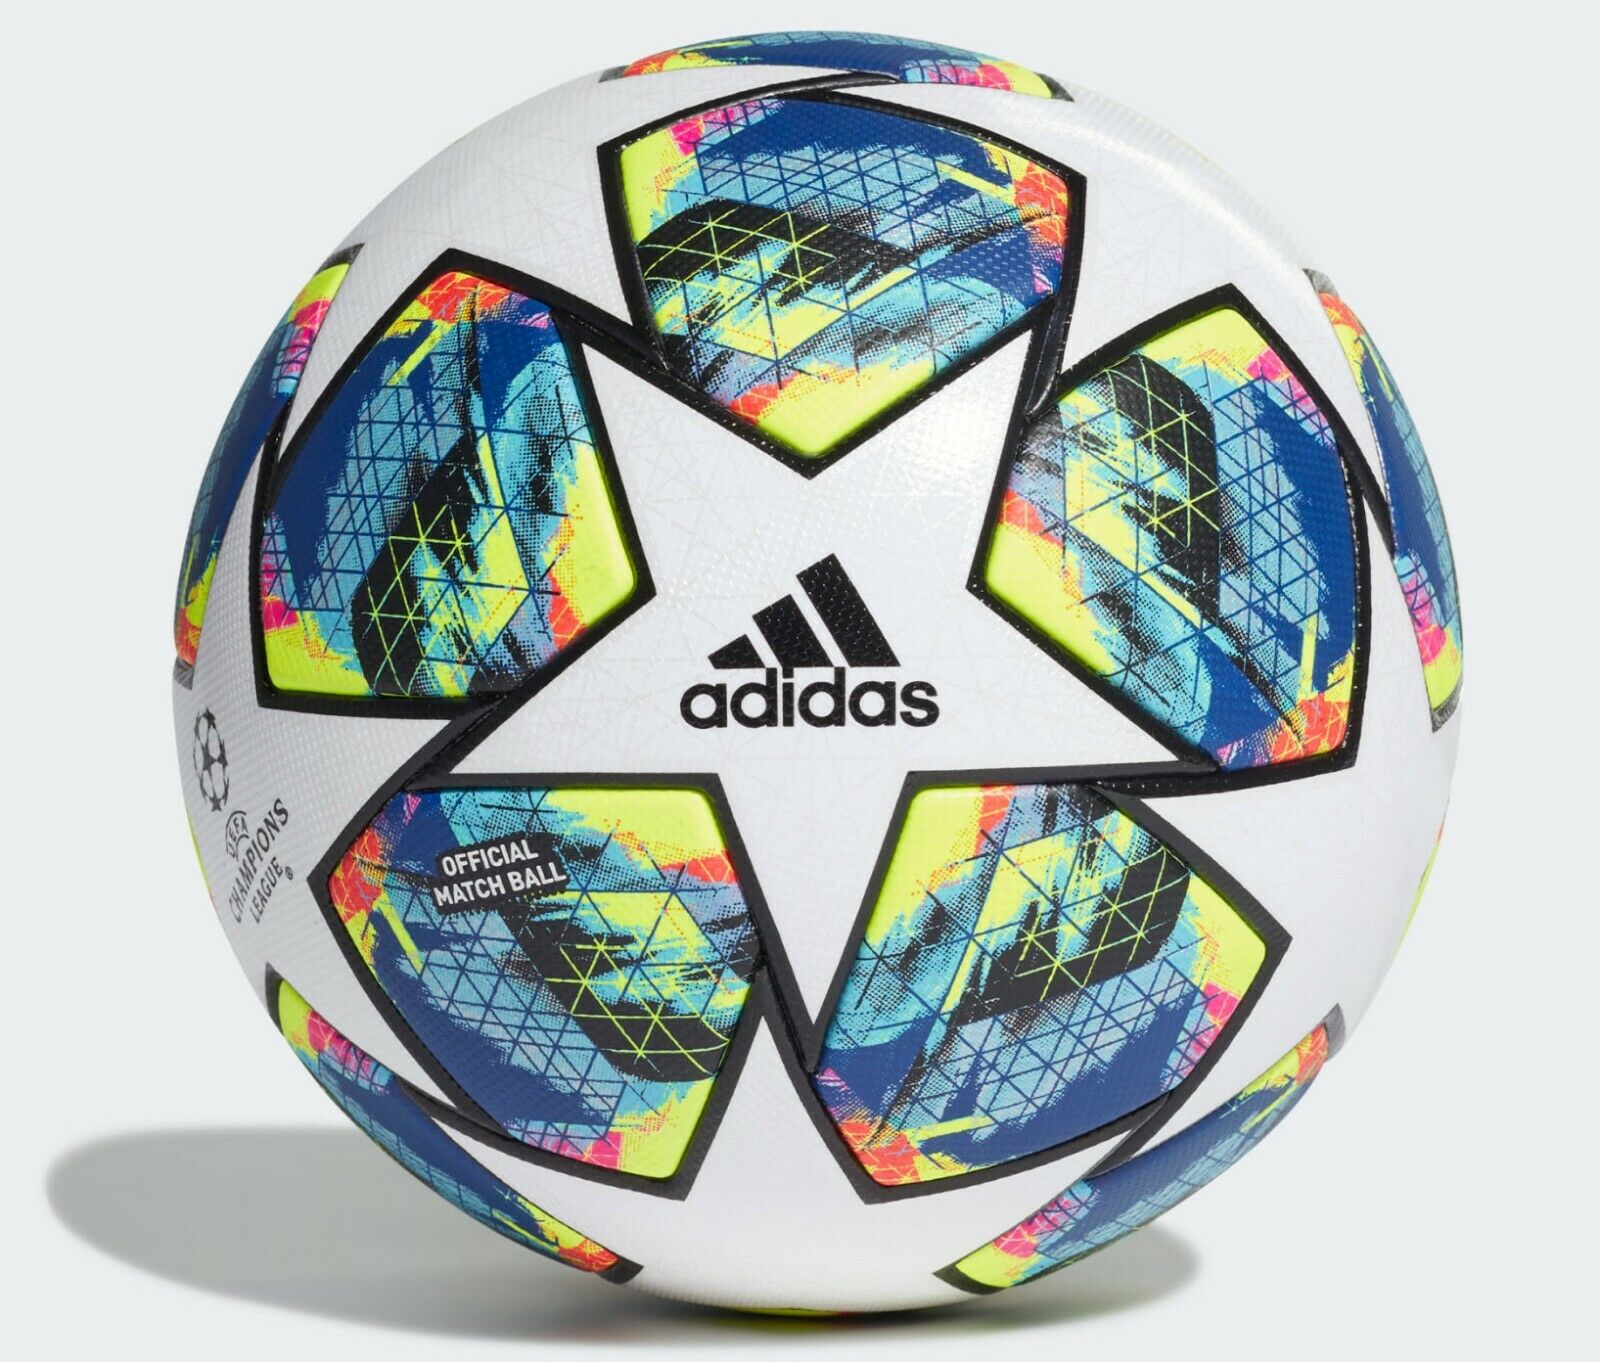 Adidas Champions League Finale Authentic Official Match Ball 2019-20 Size 5